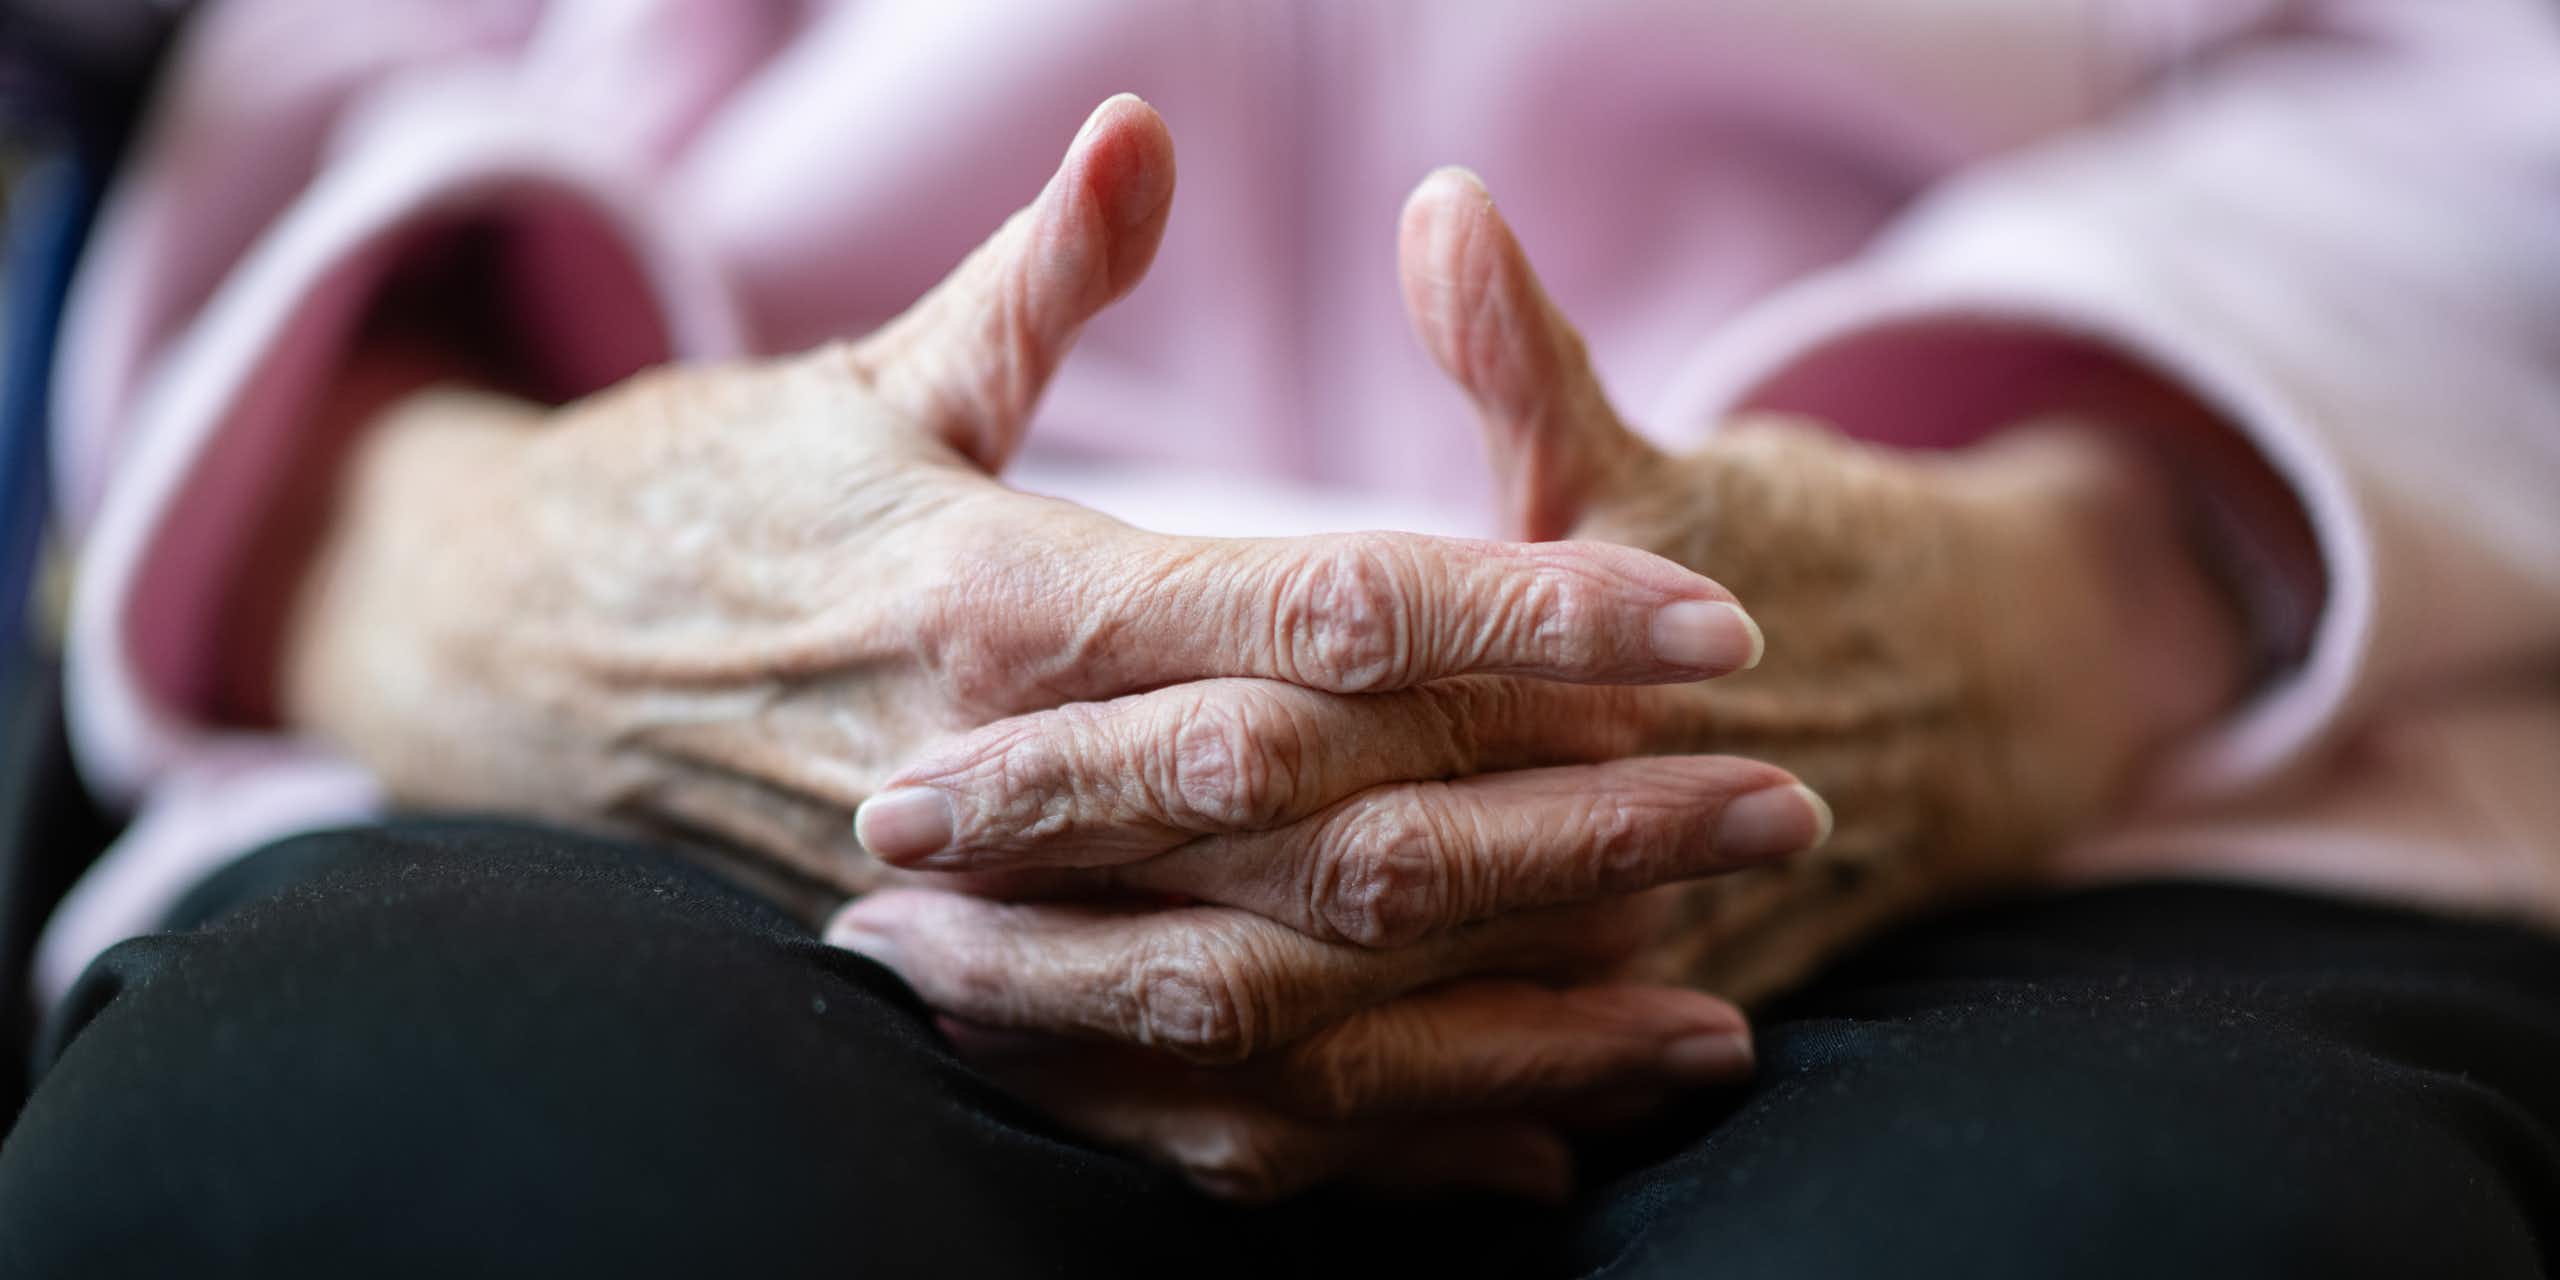 An elderly person's hands are folded in the person's lap.